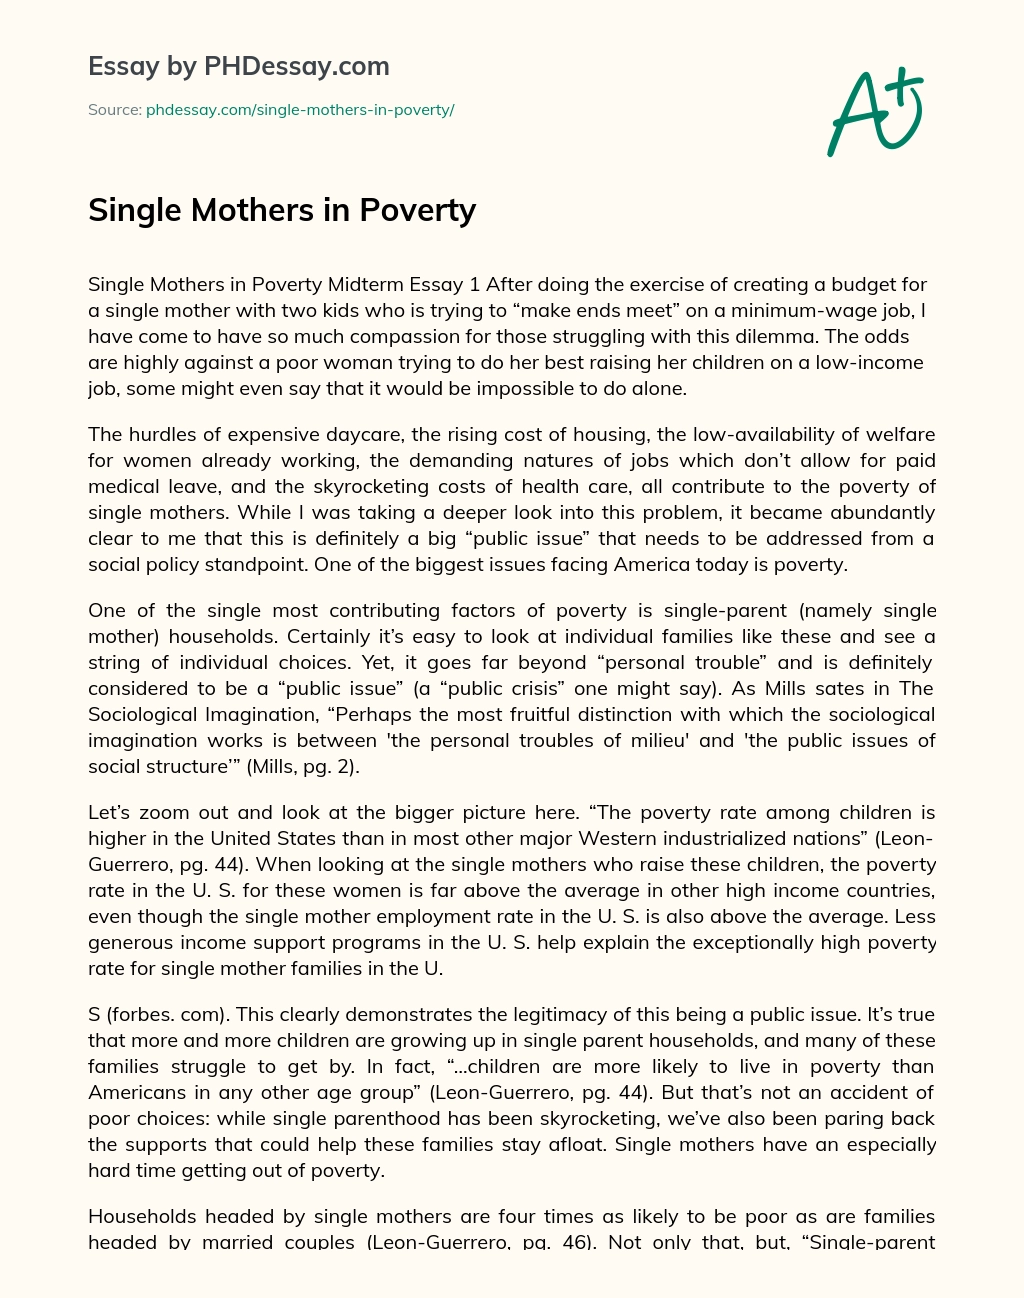 Single Mothers in Poverty essay